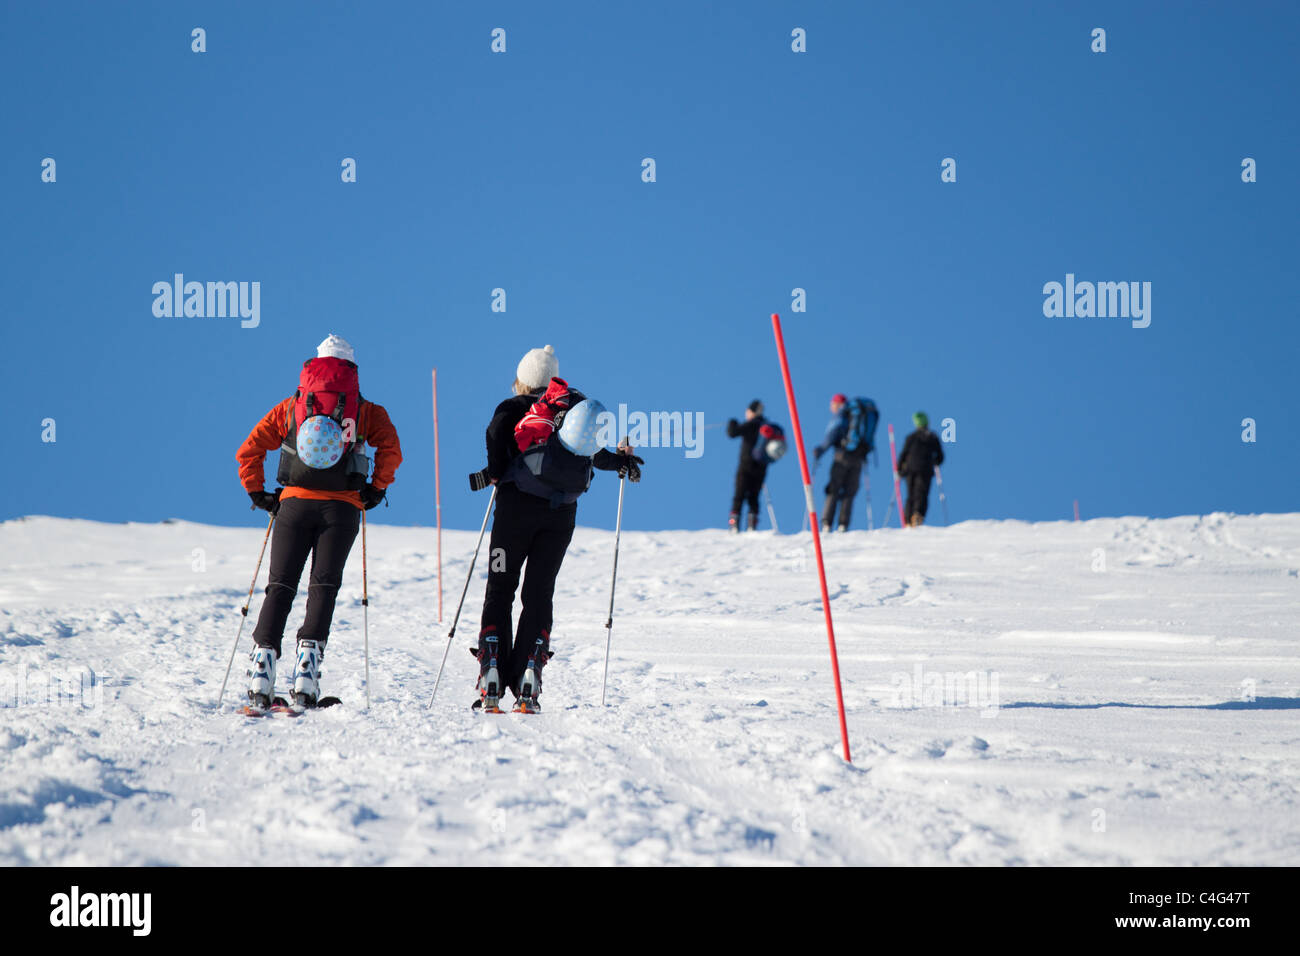 Female skiers with male skiers in the background. Stock Photo